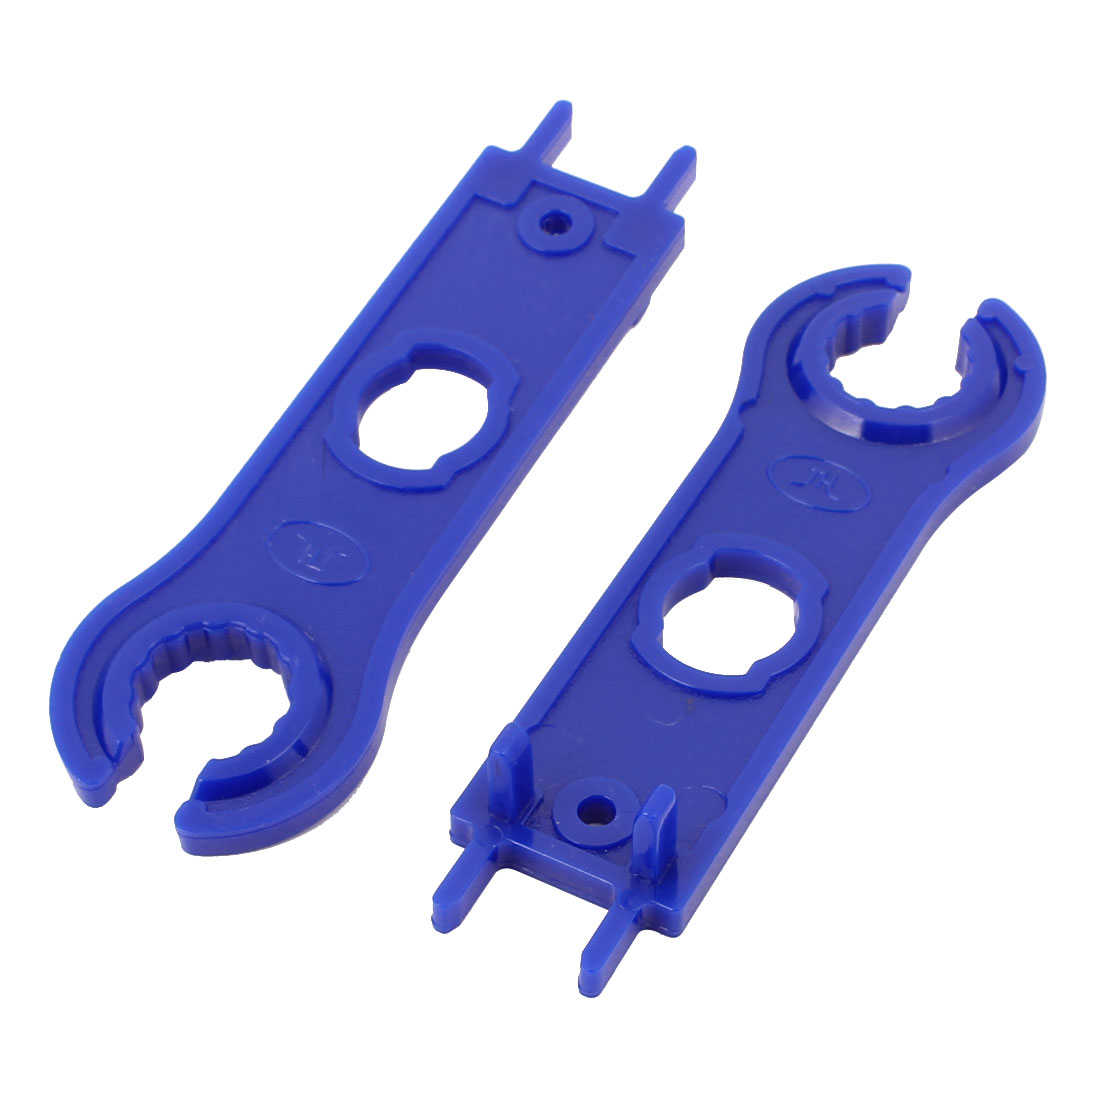 2pcs MC4 Solar Panel Connector Disconnecting Tool Spanners Wrench Blue